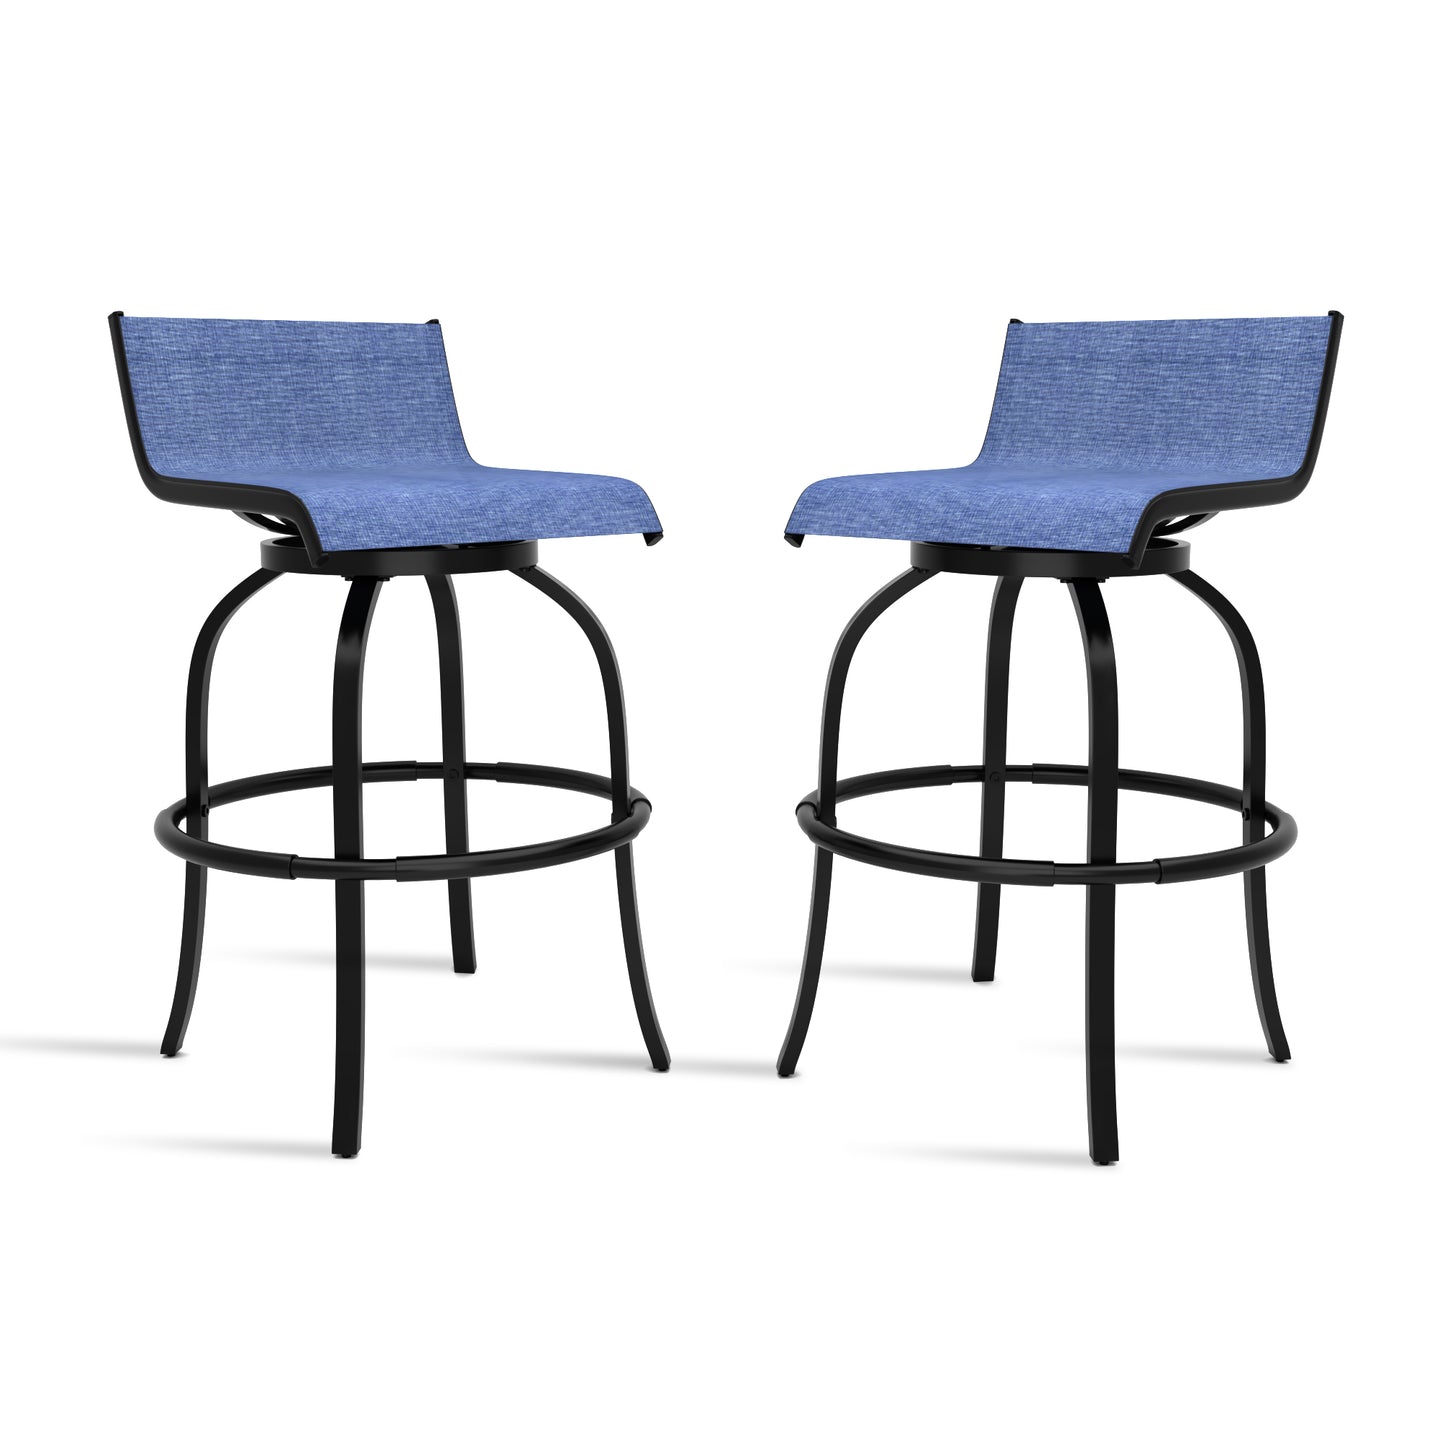 2 PCS outdoor swivel bar stools with backrest and high stool without armrests